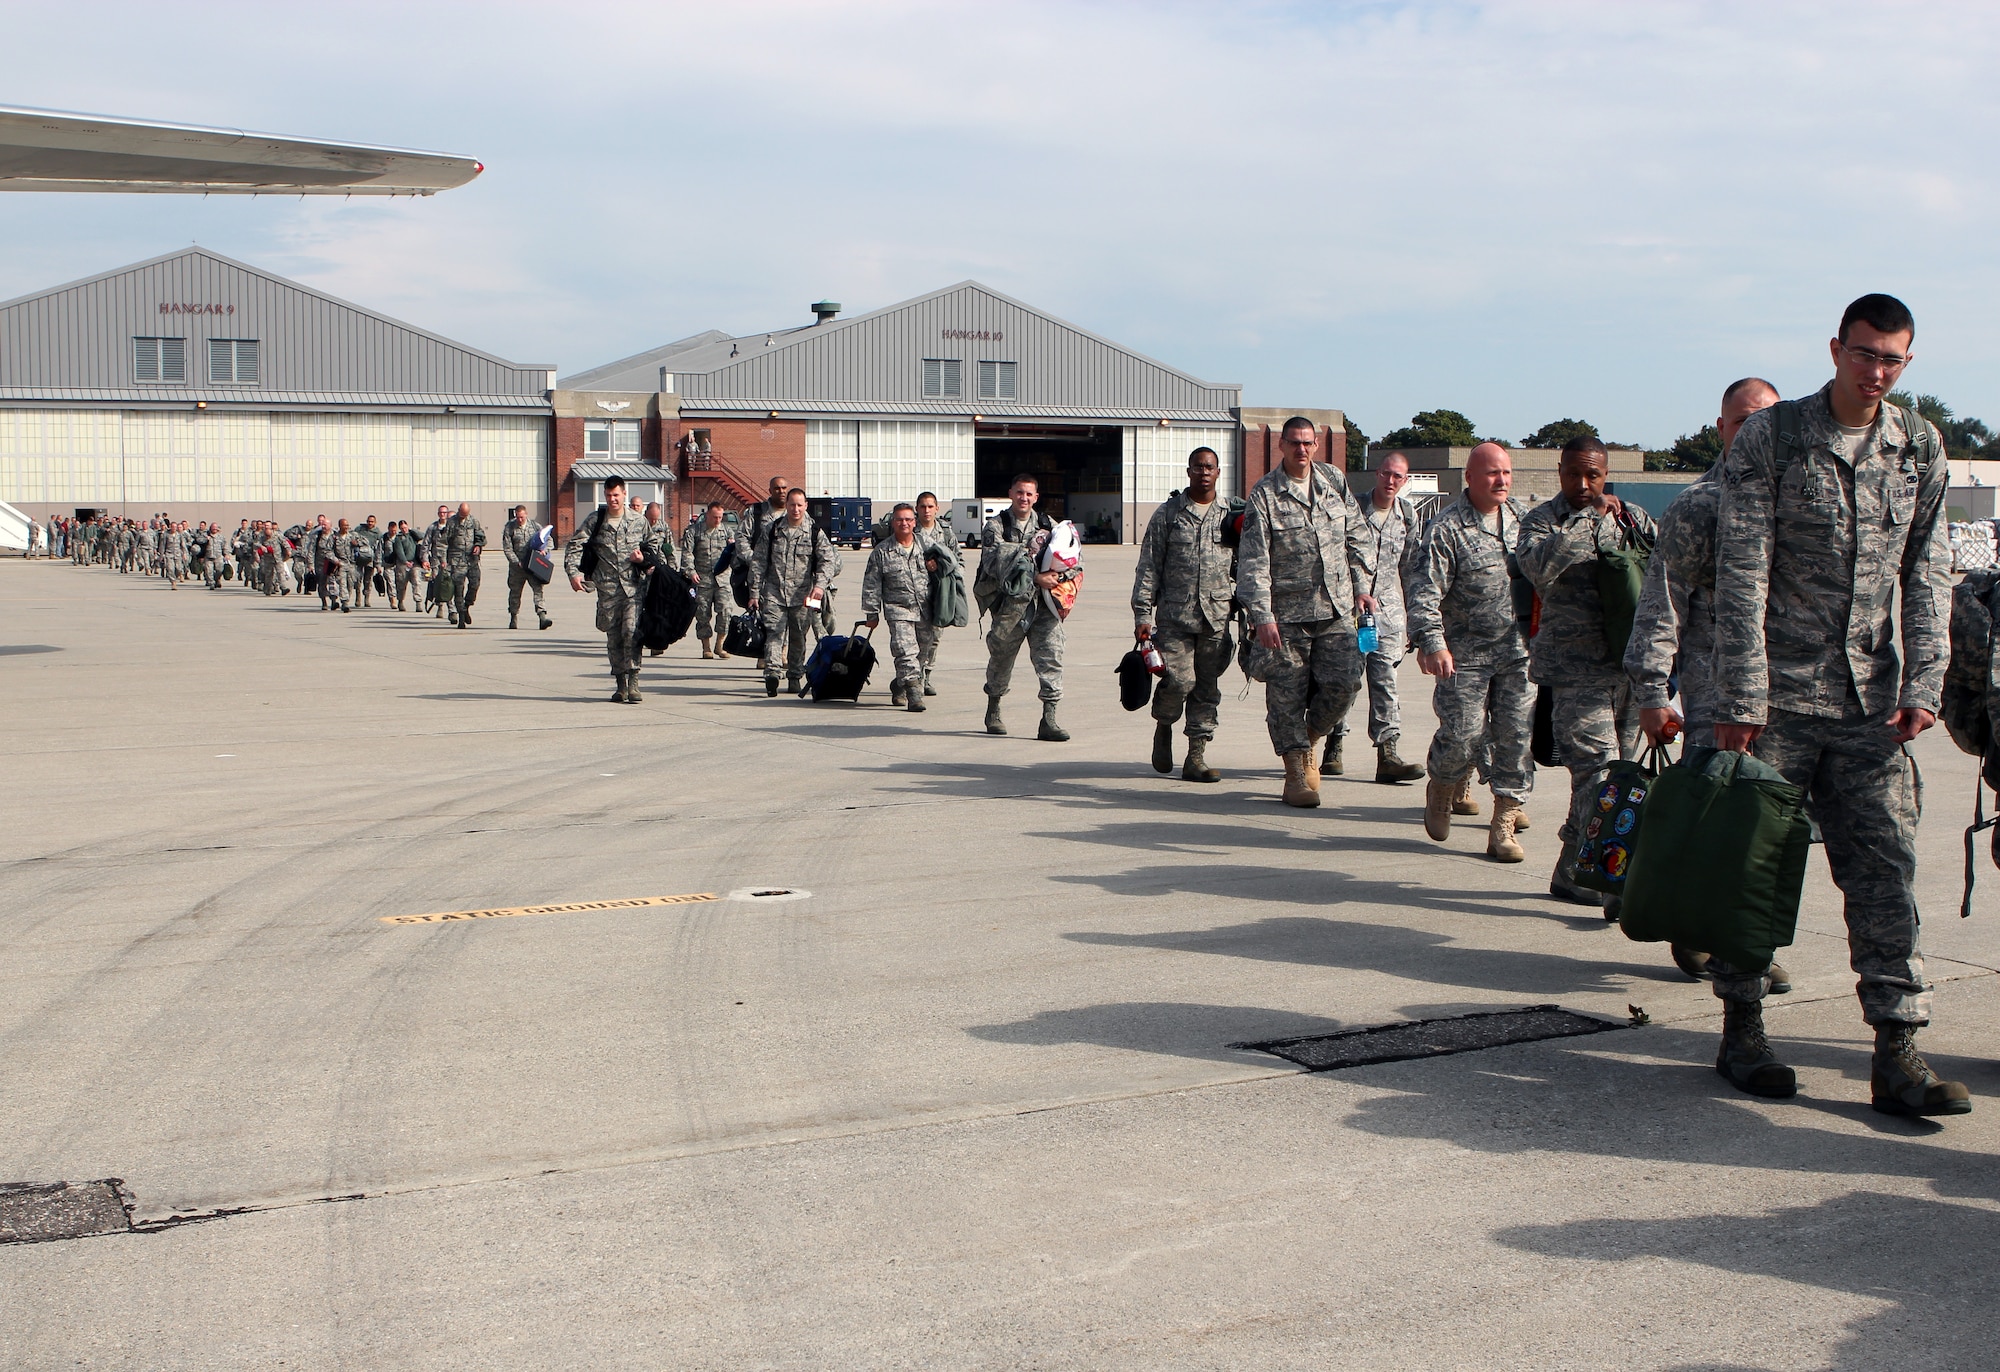 Citizen-Airmen of the 127th Wing, Michigan Air National Guard walk to an aircraft for deployment to Afghanistan from Selfridge Air National Guard Base, Mich., Sept. 25, 2011. The Airmen will be flying and supporting A-10 Thunderbolt II aircraft while deployed. (U.S. Air Force photo by SSgt. Anna-Marie Wyant)